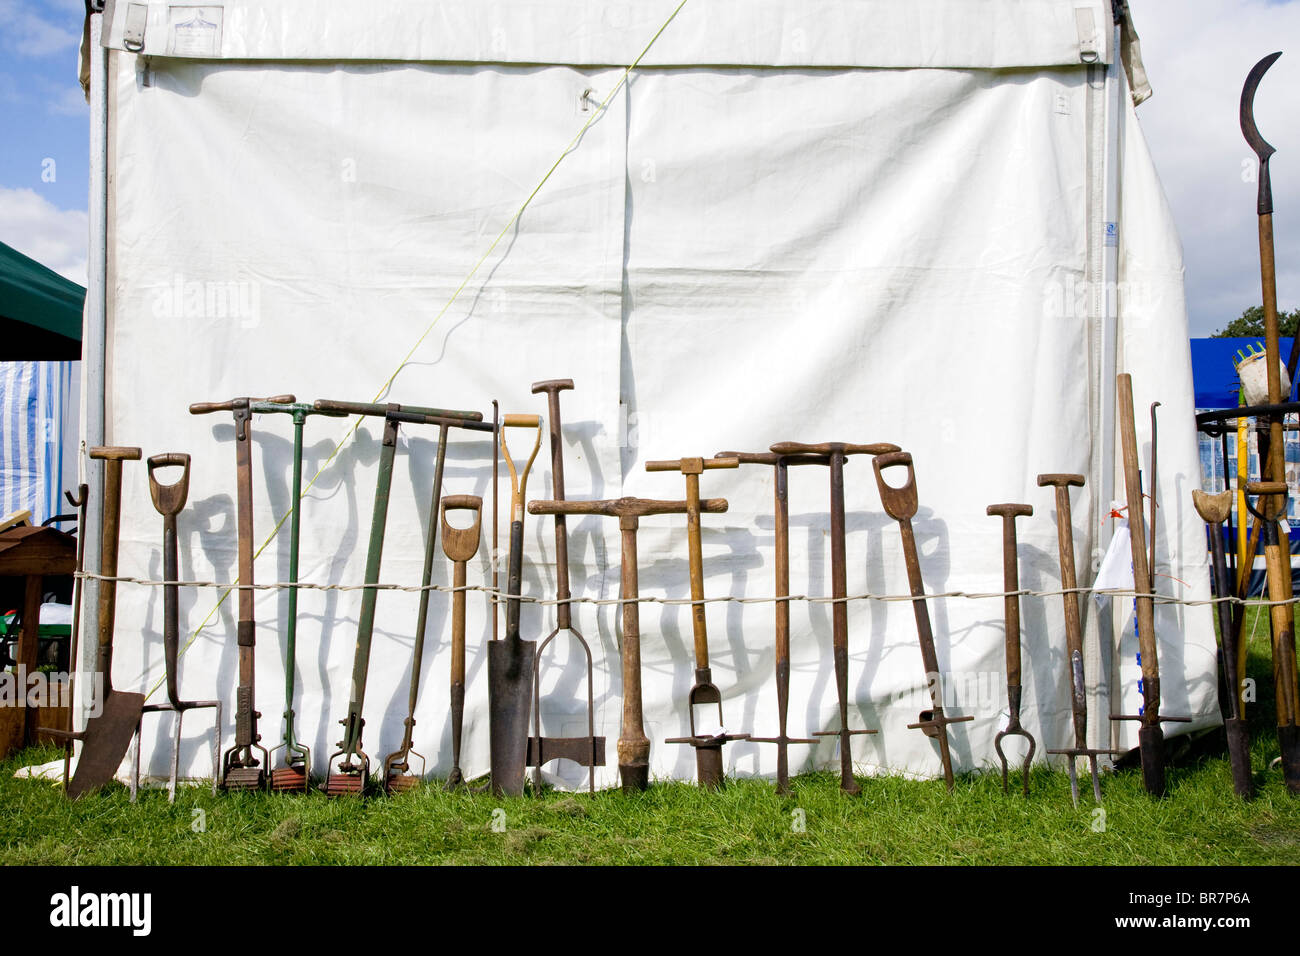 Second hand garden tools for sale at a summer fair Stock Photo - Alamy